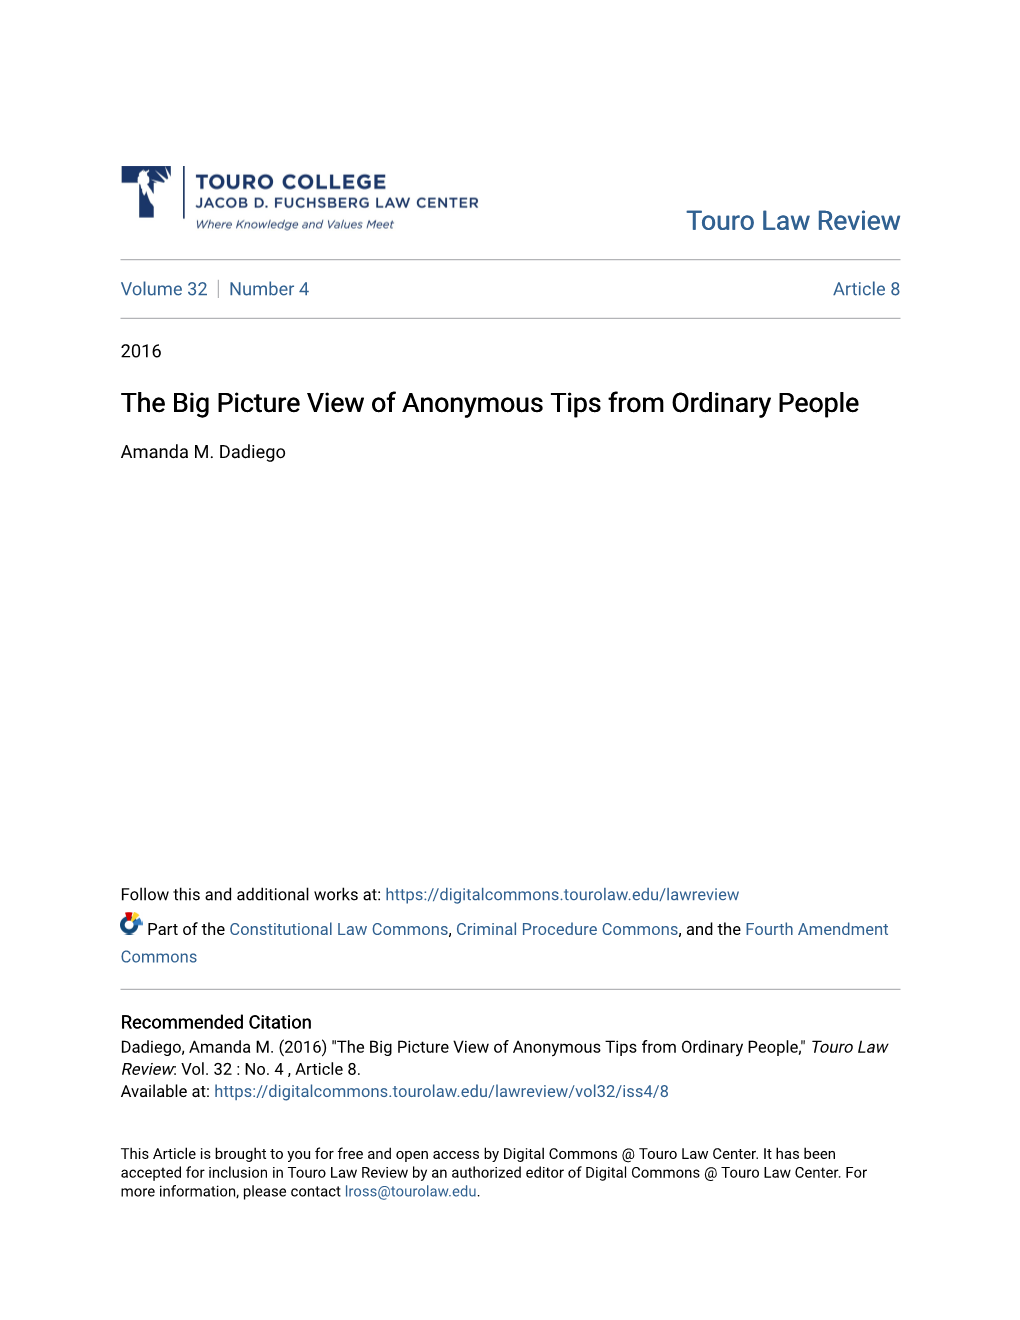 The Big Picture View of Anonymous Tips from Ordinary People